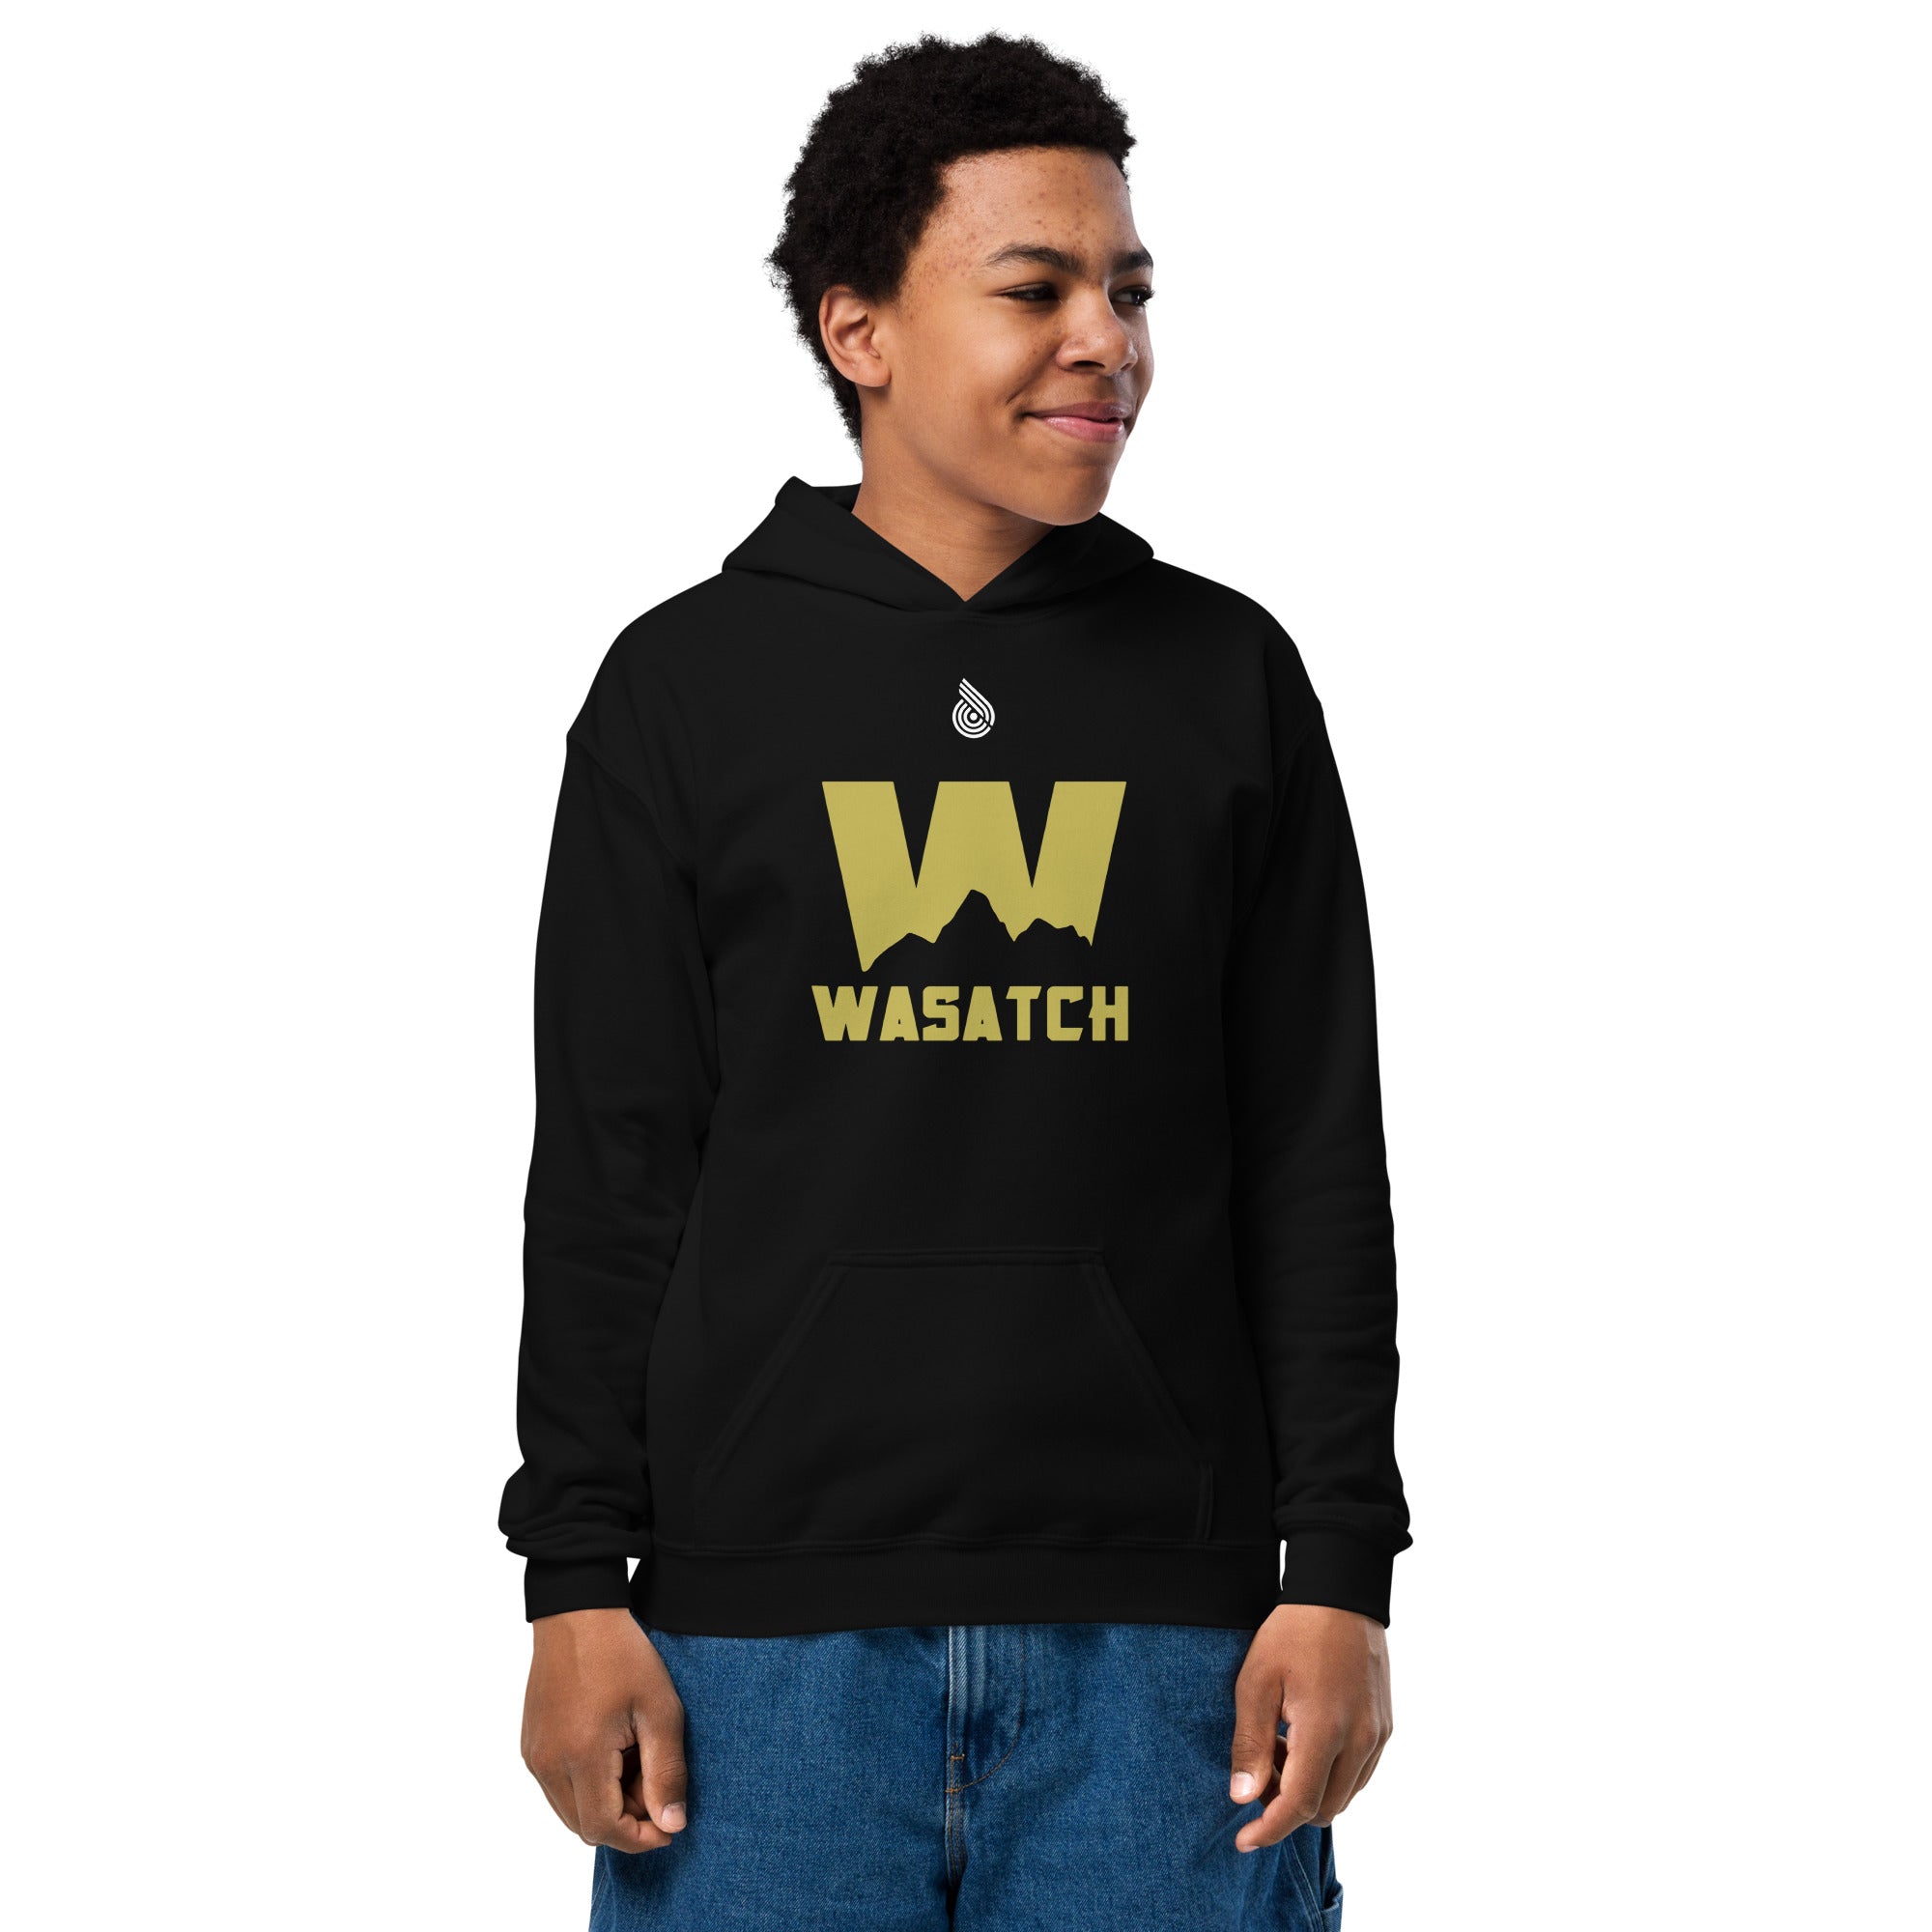 Wasatch Youth heavy blend hoodie